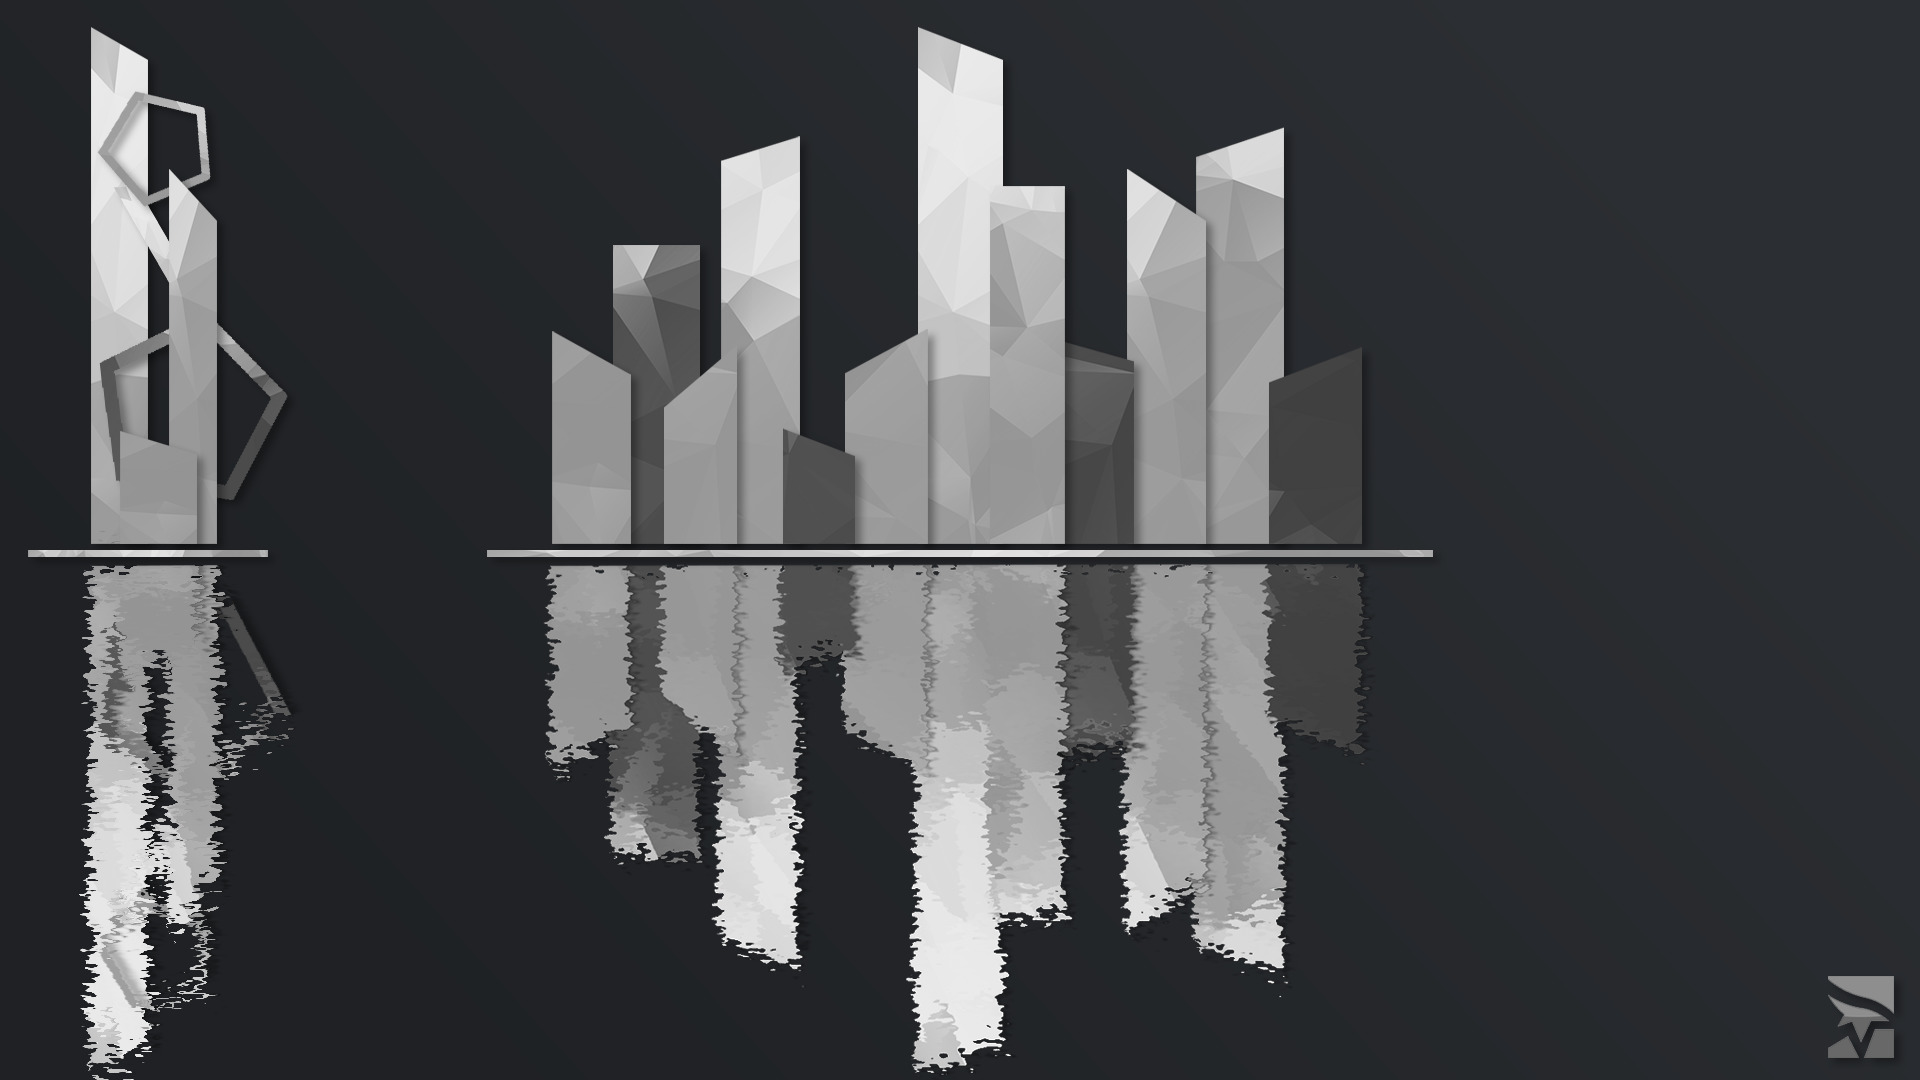 Mirrors Edge, Reflection, Geometry, City, Abstract, White, Black, The Shard Wallpaper